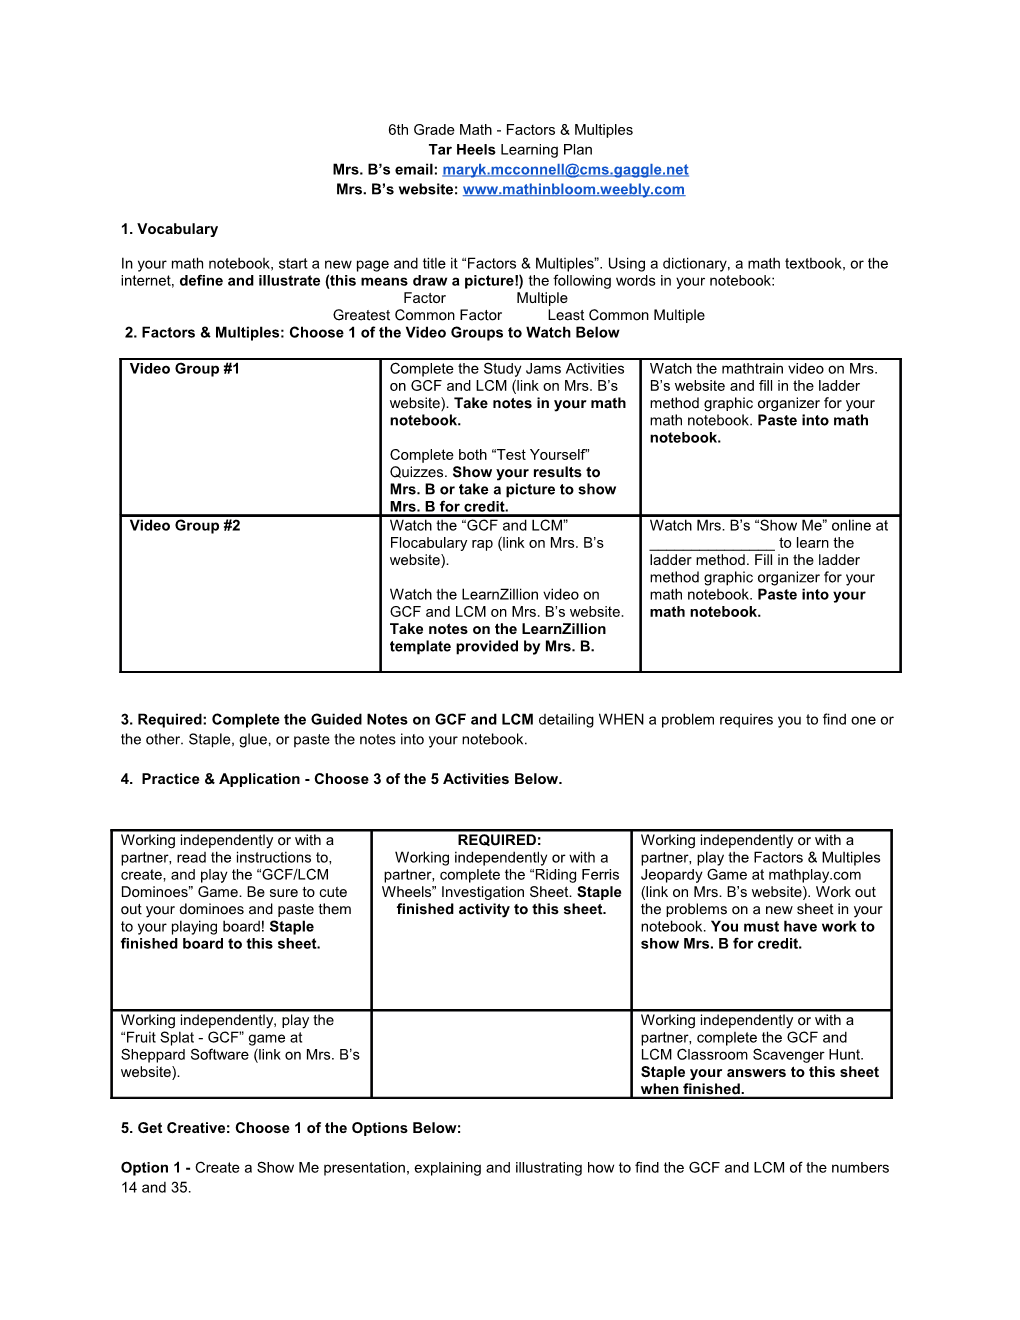 Factors & Multiples Learning Plan - Mastery